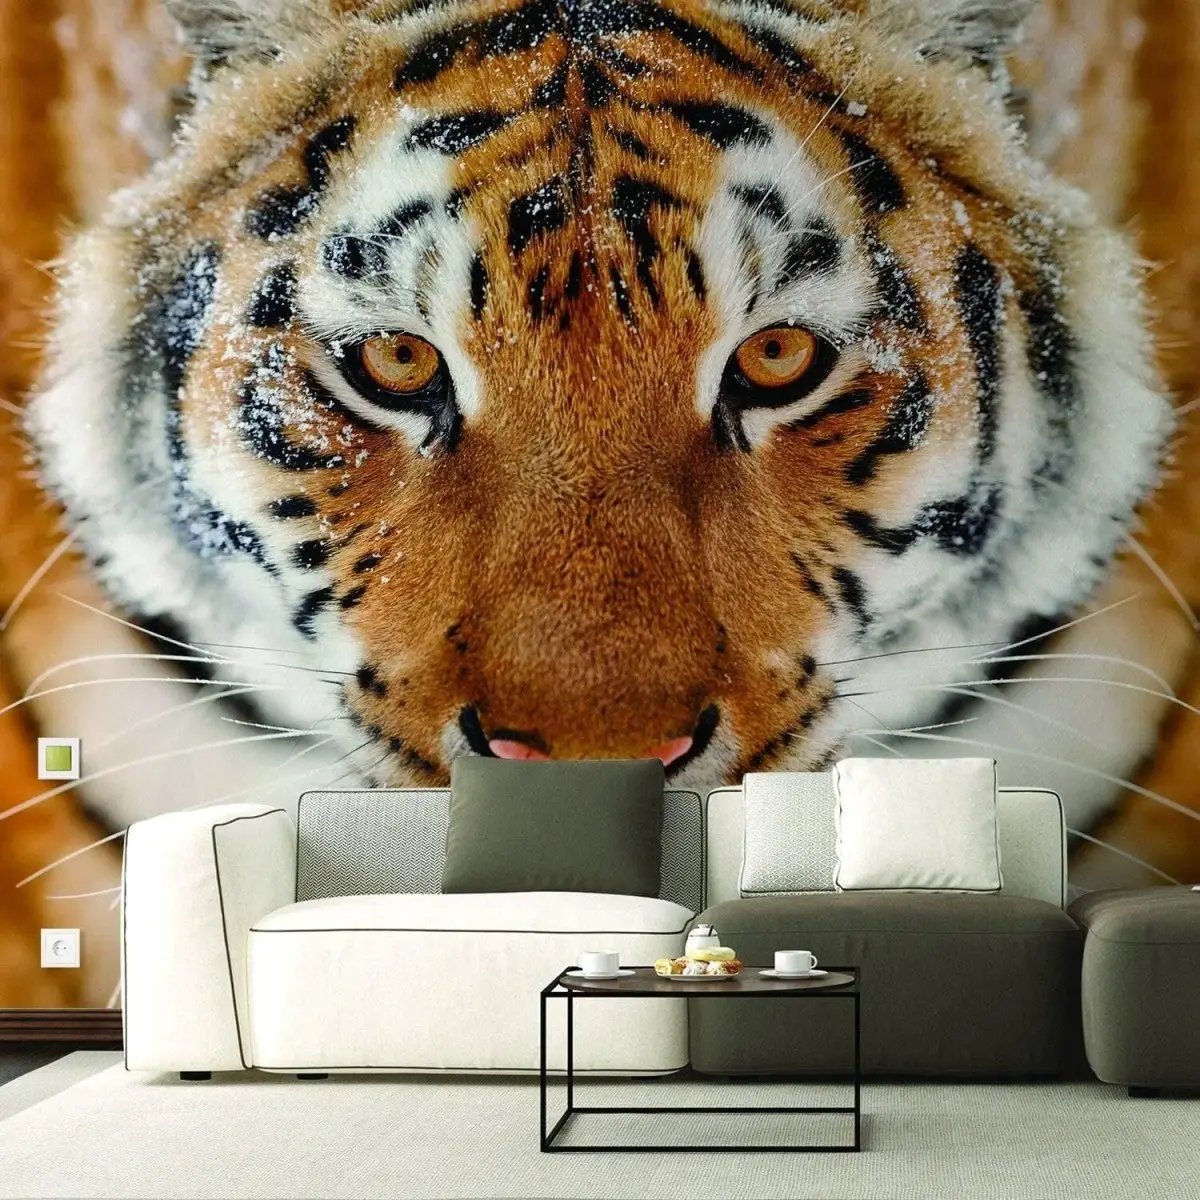 Elegant Tiger Wall Decal: Transform Your Space with Wild Style! - Decords